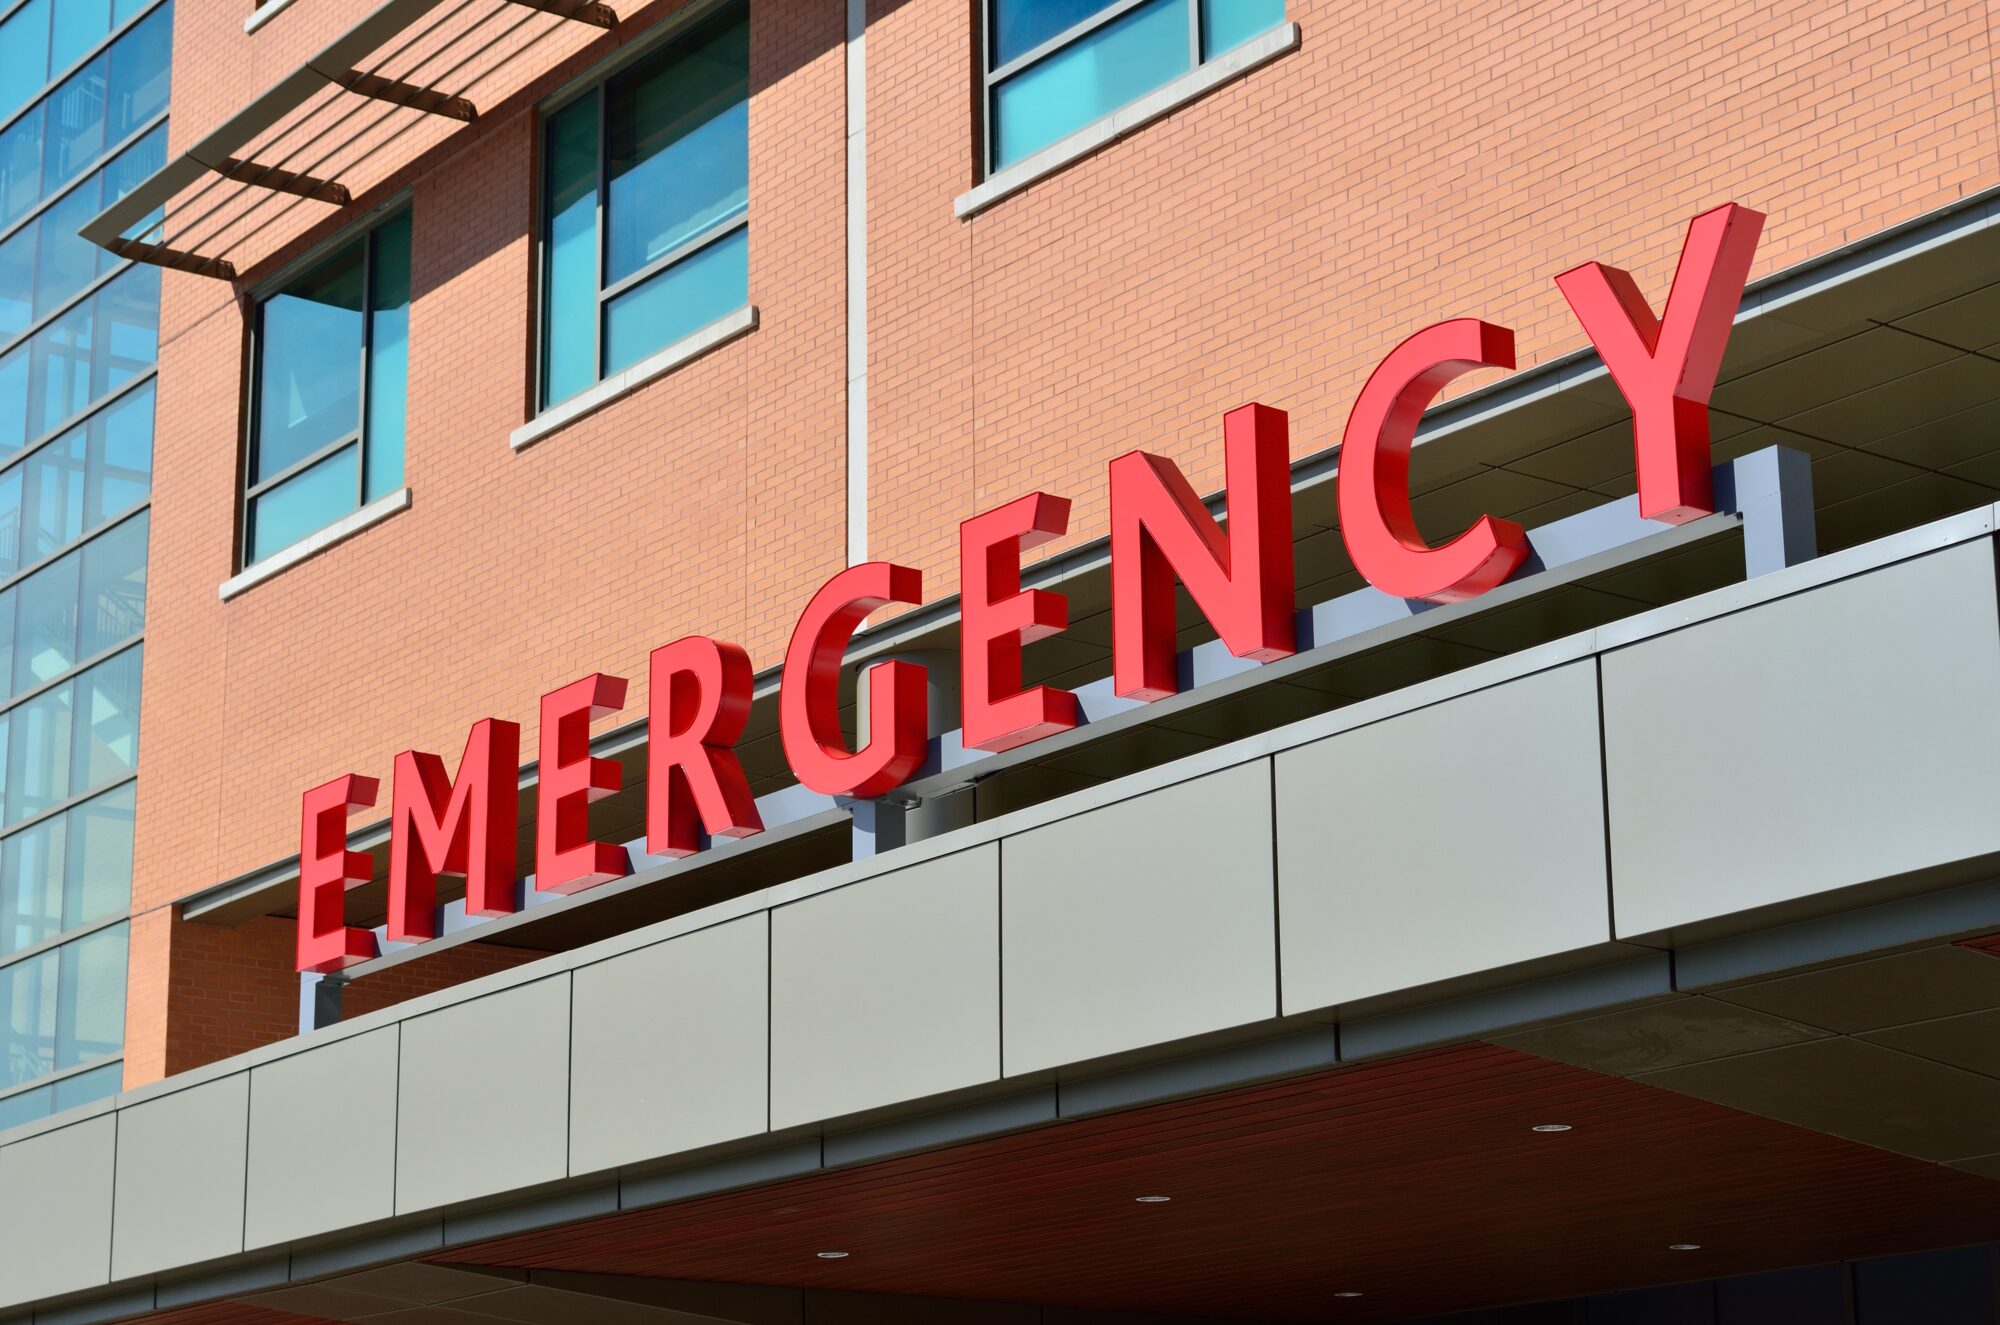 Red "emergency" sign on the facade of a modern hospital building specializing in defective product injury cases, with brick walls and large windows, under a clear sky.